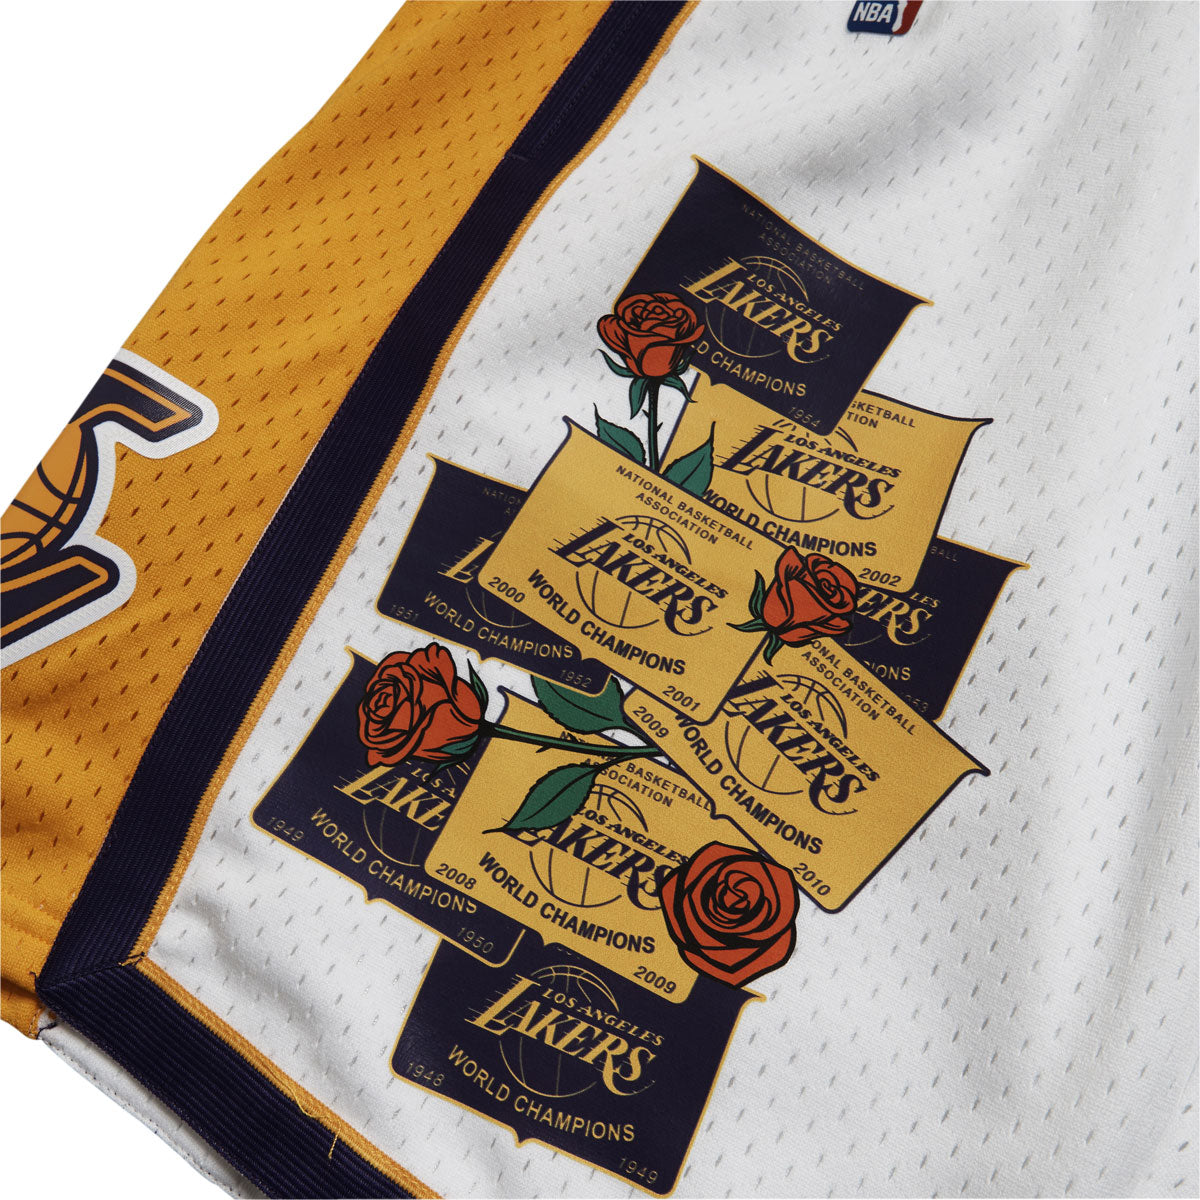 Mitchell & Ness x NBA Roses and Banners Lakers Shorts - White